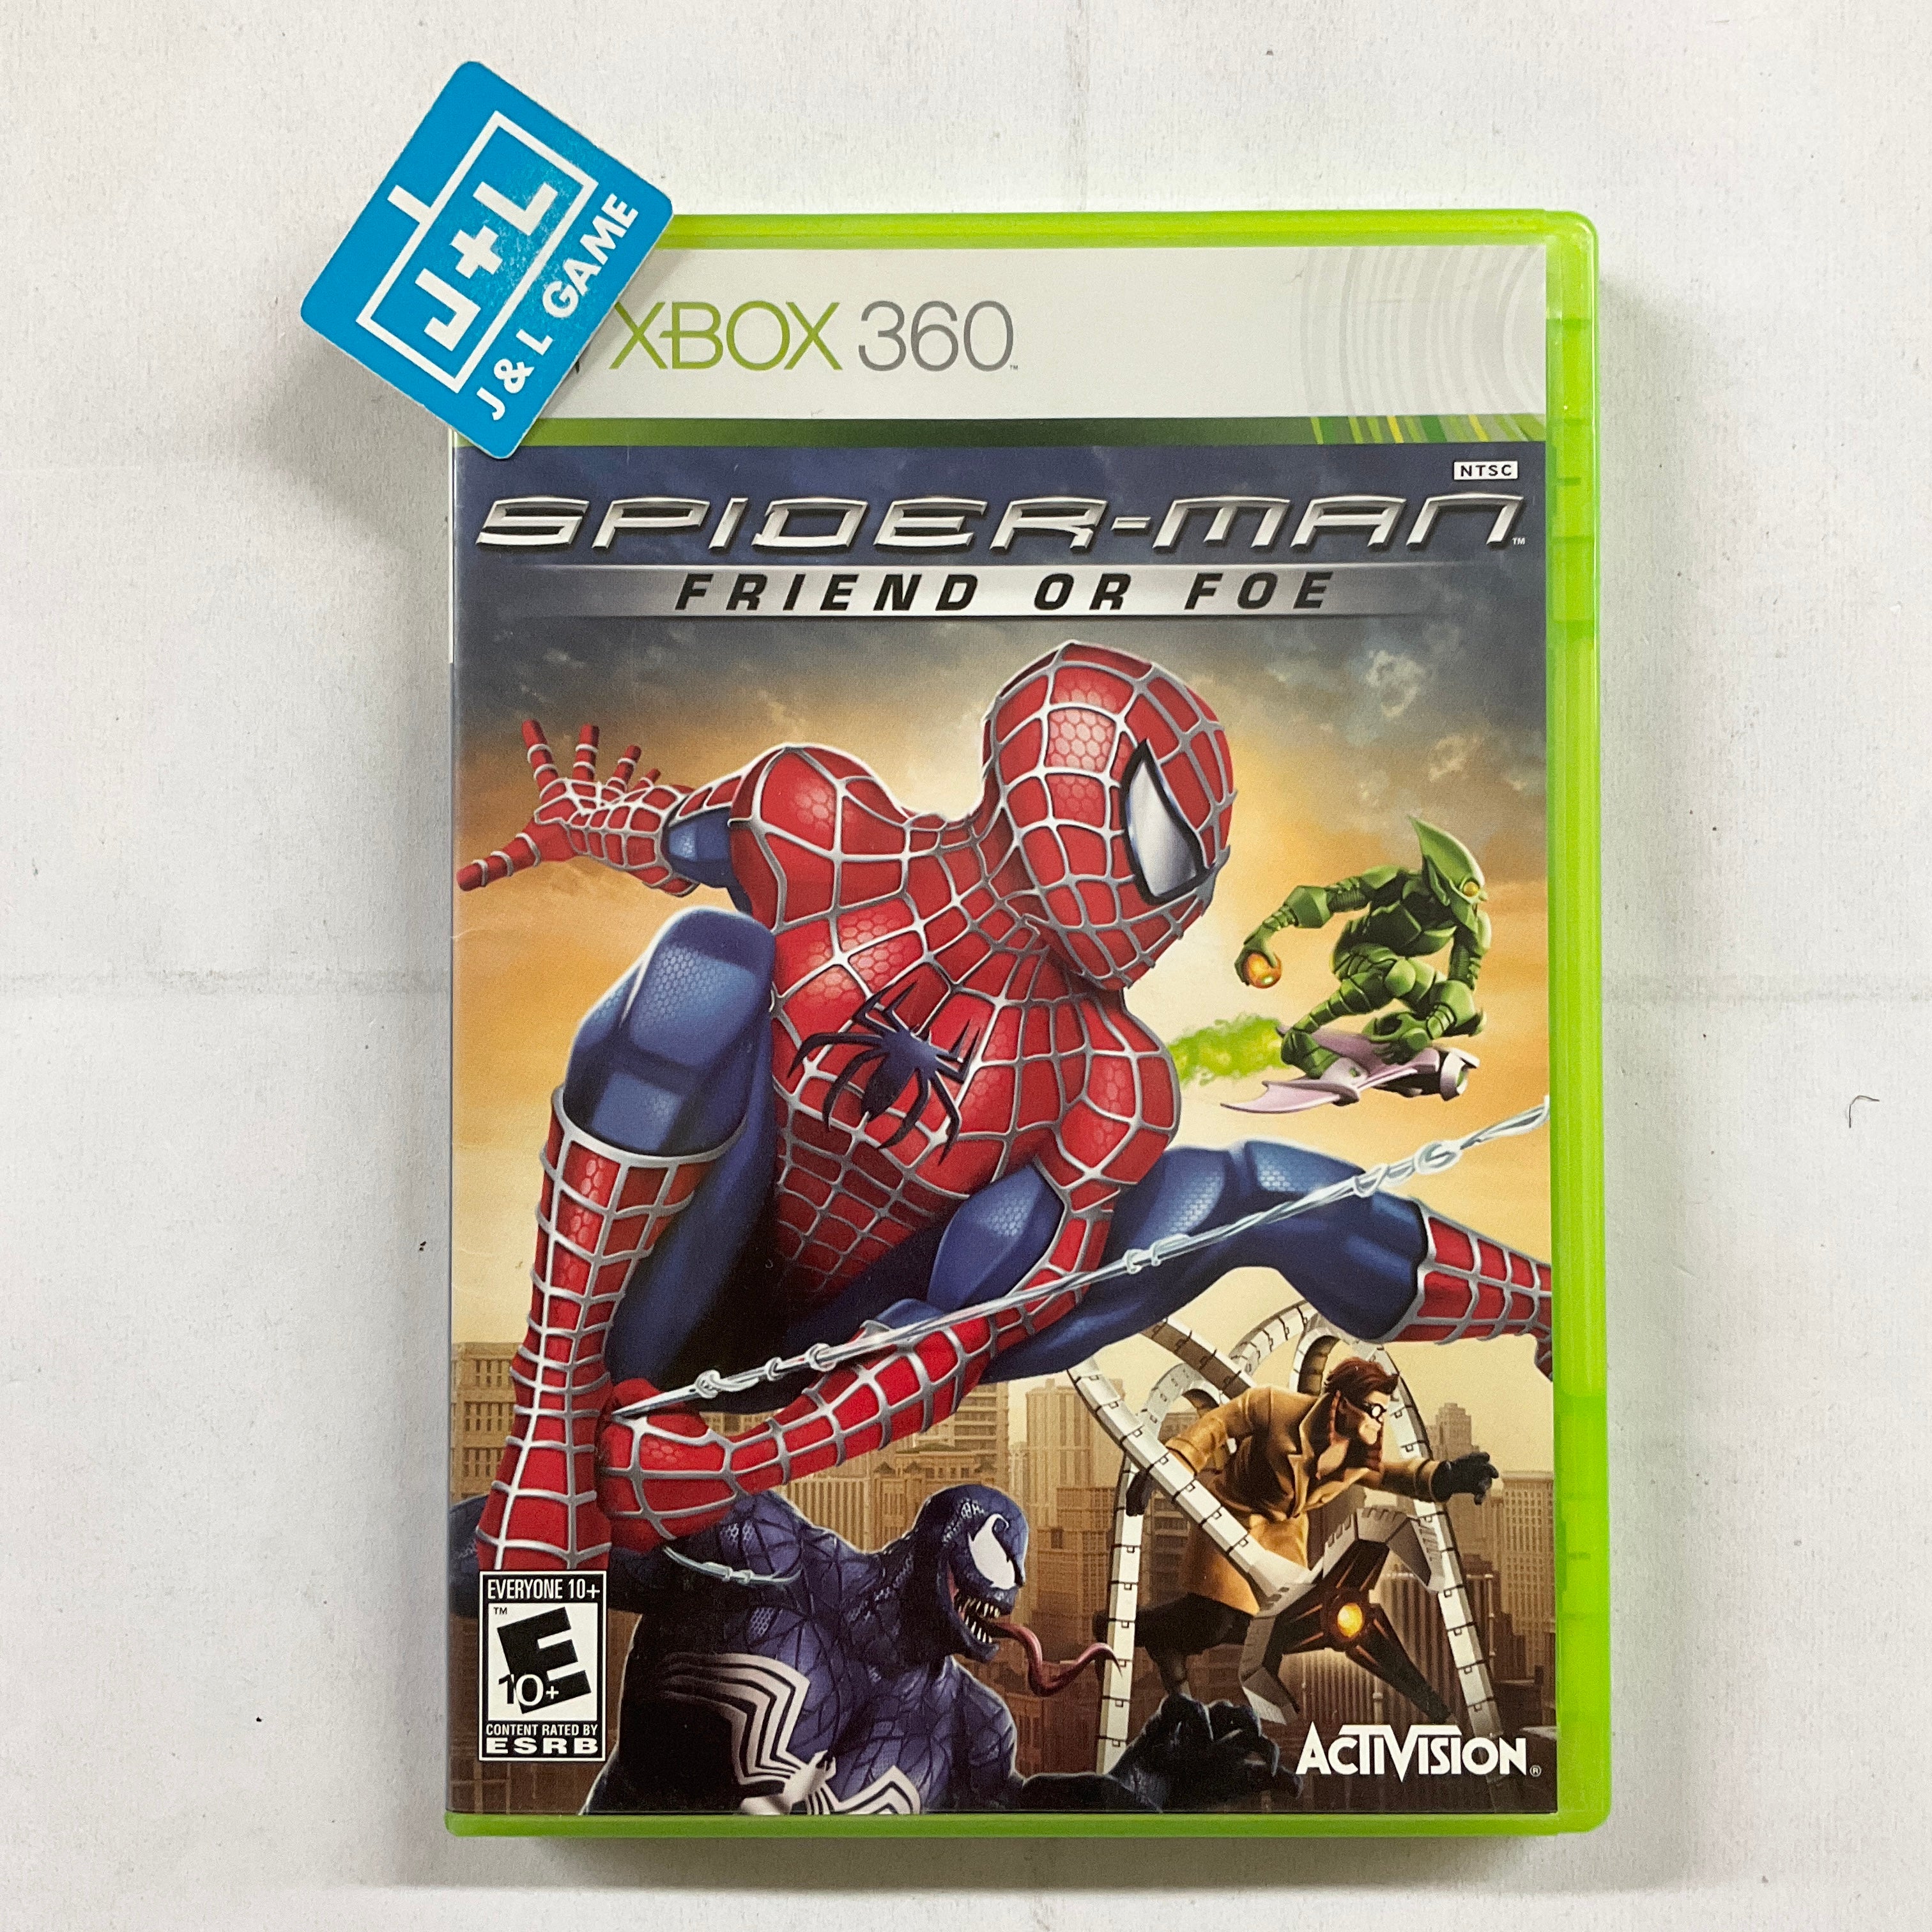 Spider-Man: Friend or Foe - Xbox 360 [Pre-Owned] Video Games Activision   